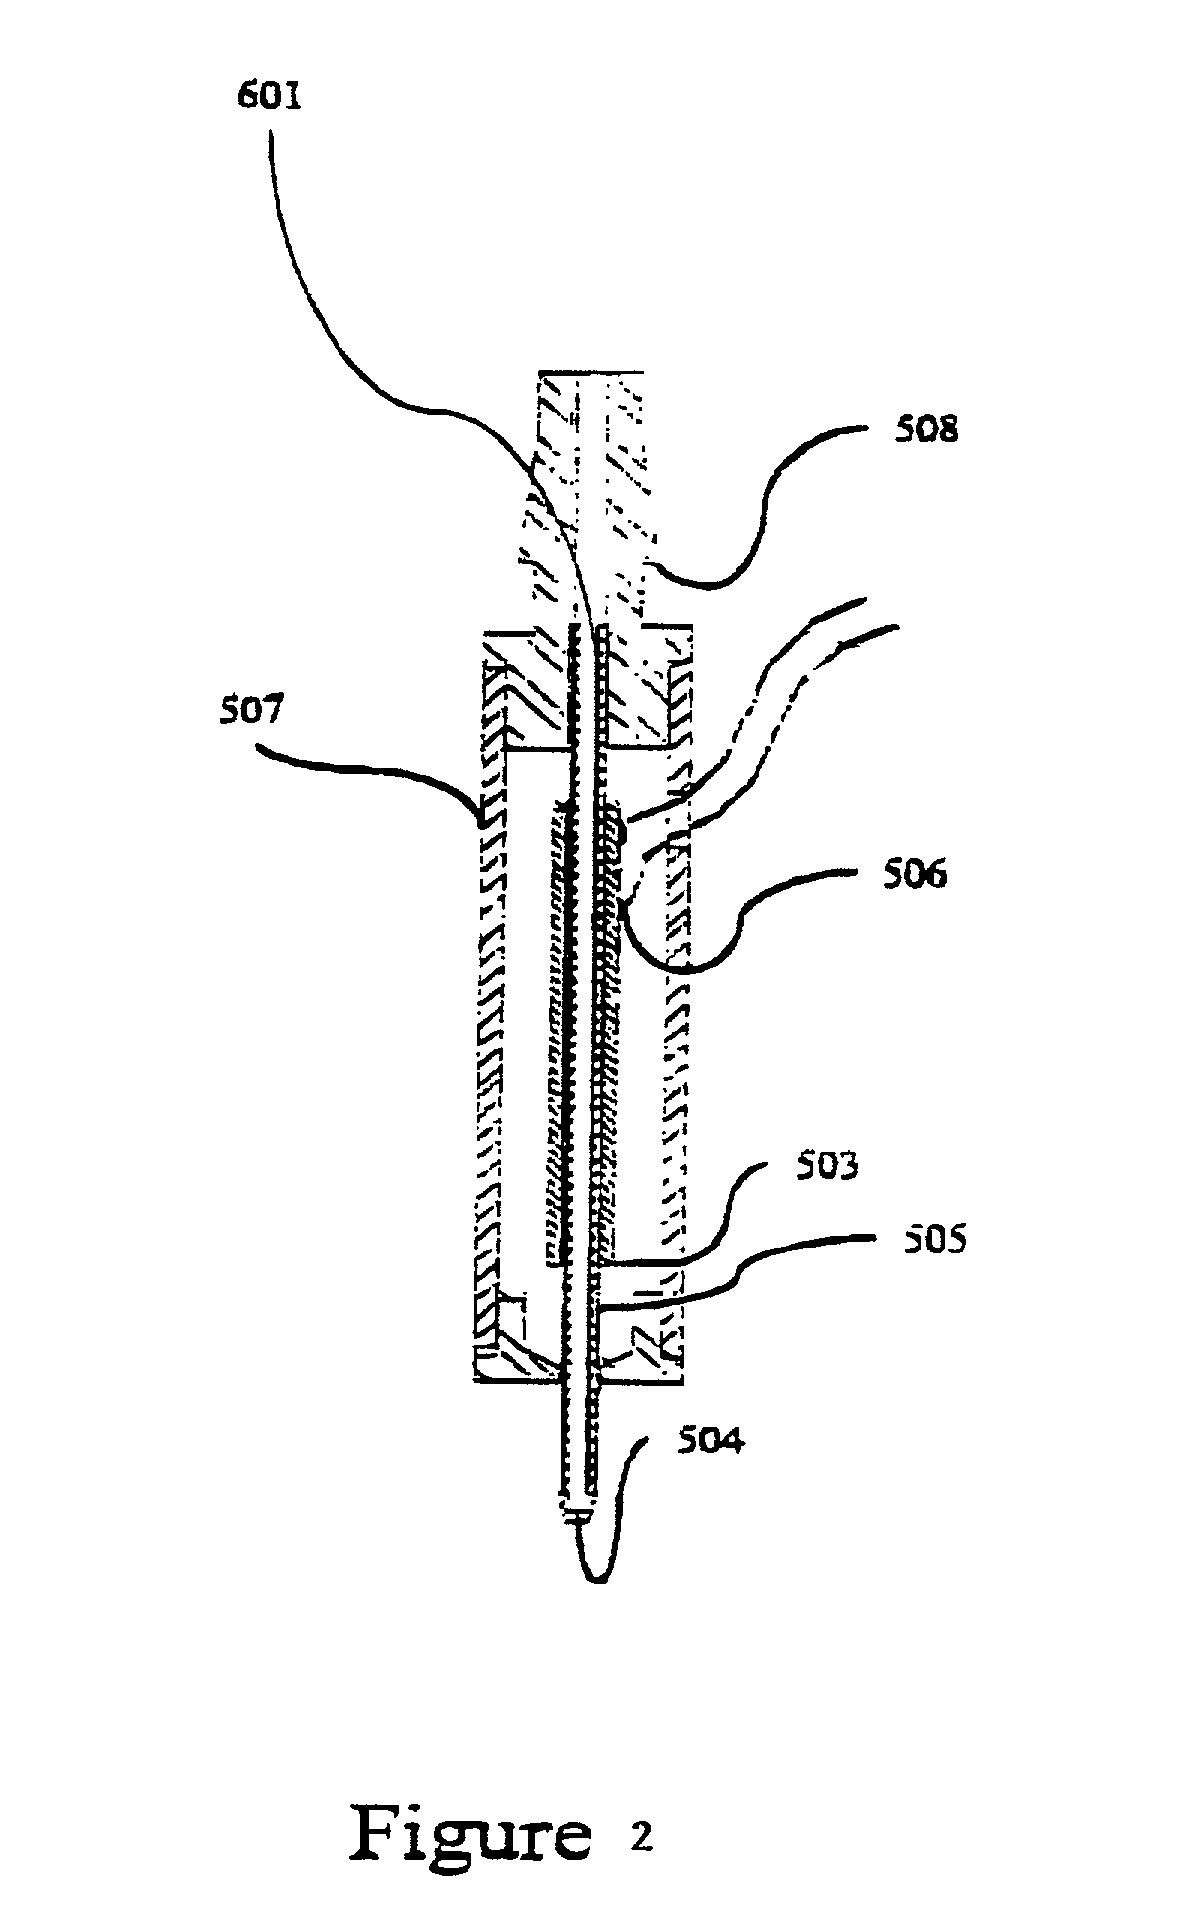 Apparatus and methods for high resolution separation and analysis of compounds